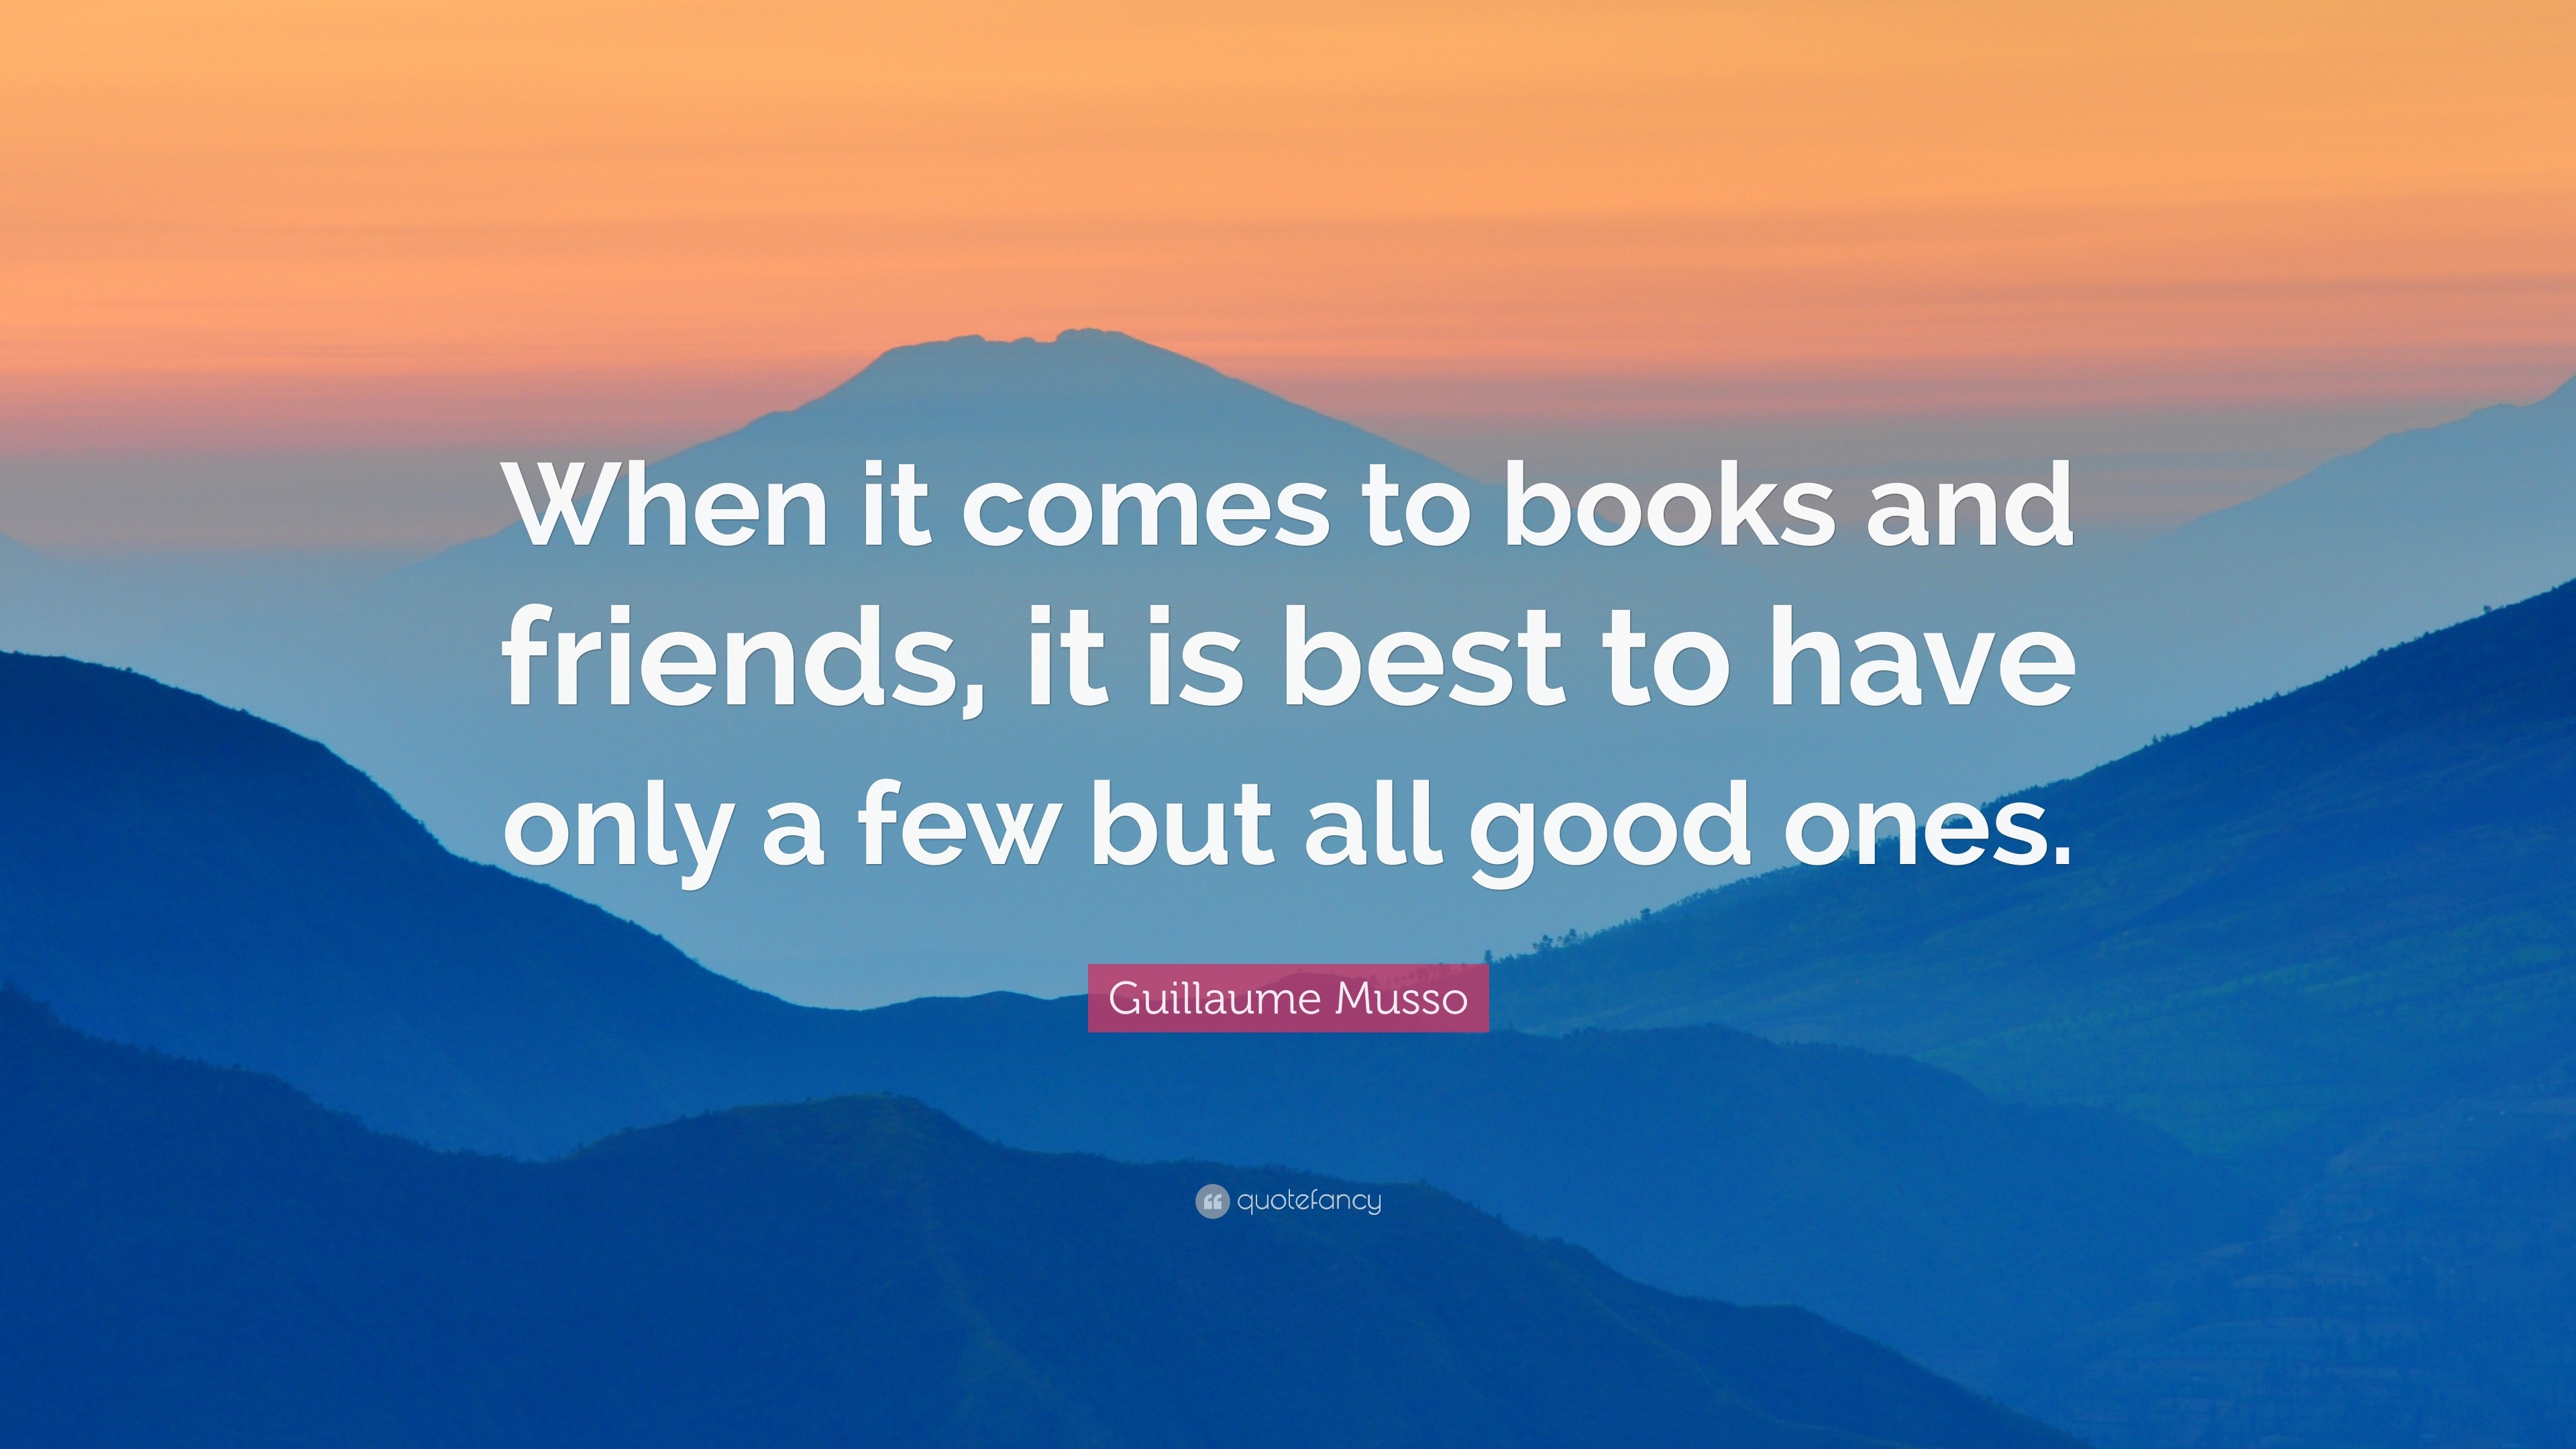 Guillaume Musso Quote: “When it comes to books and friends, it is best ...